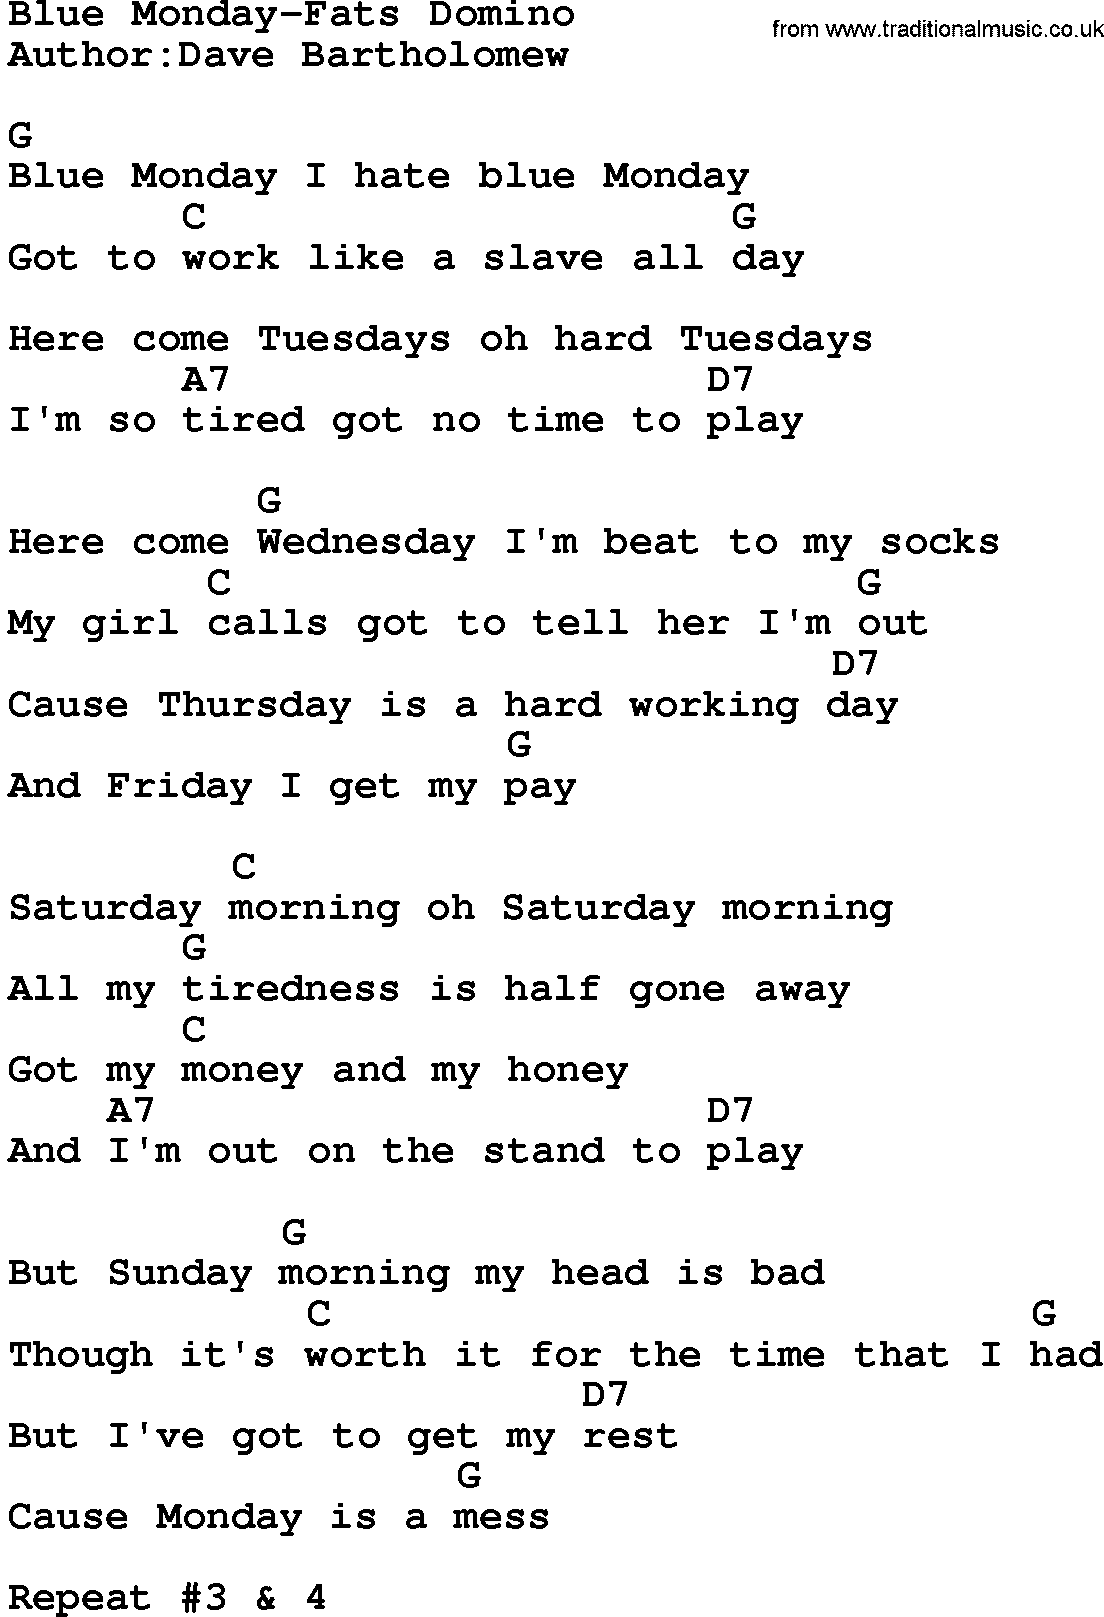 Country music song: Blue Monday-Fats Domino lyrics and chords